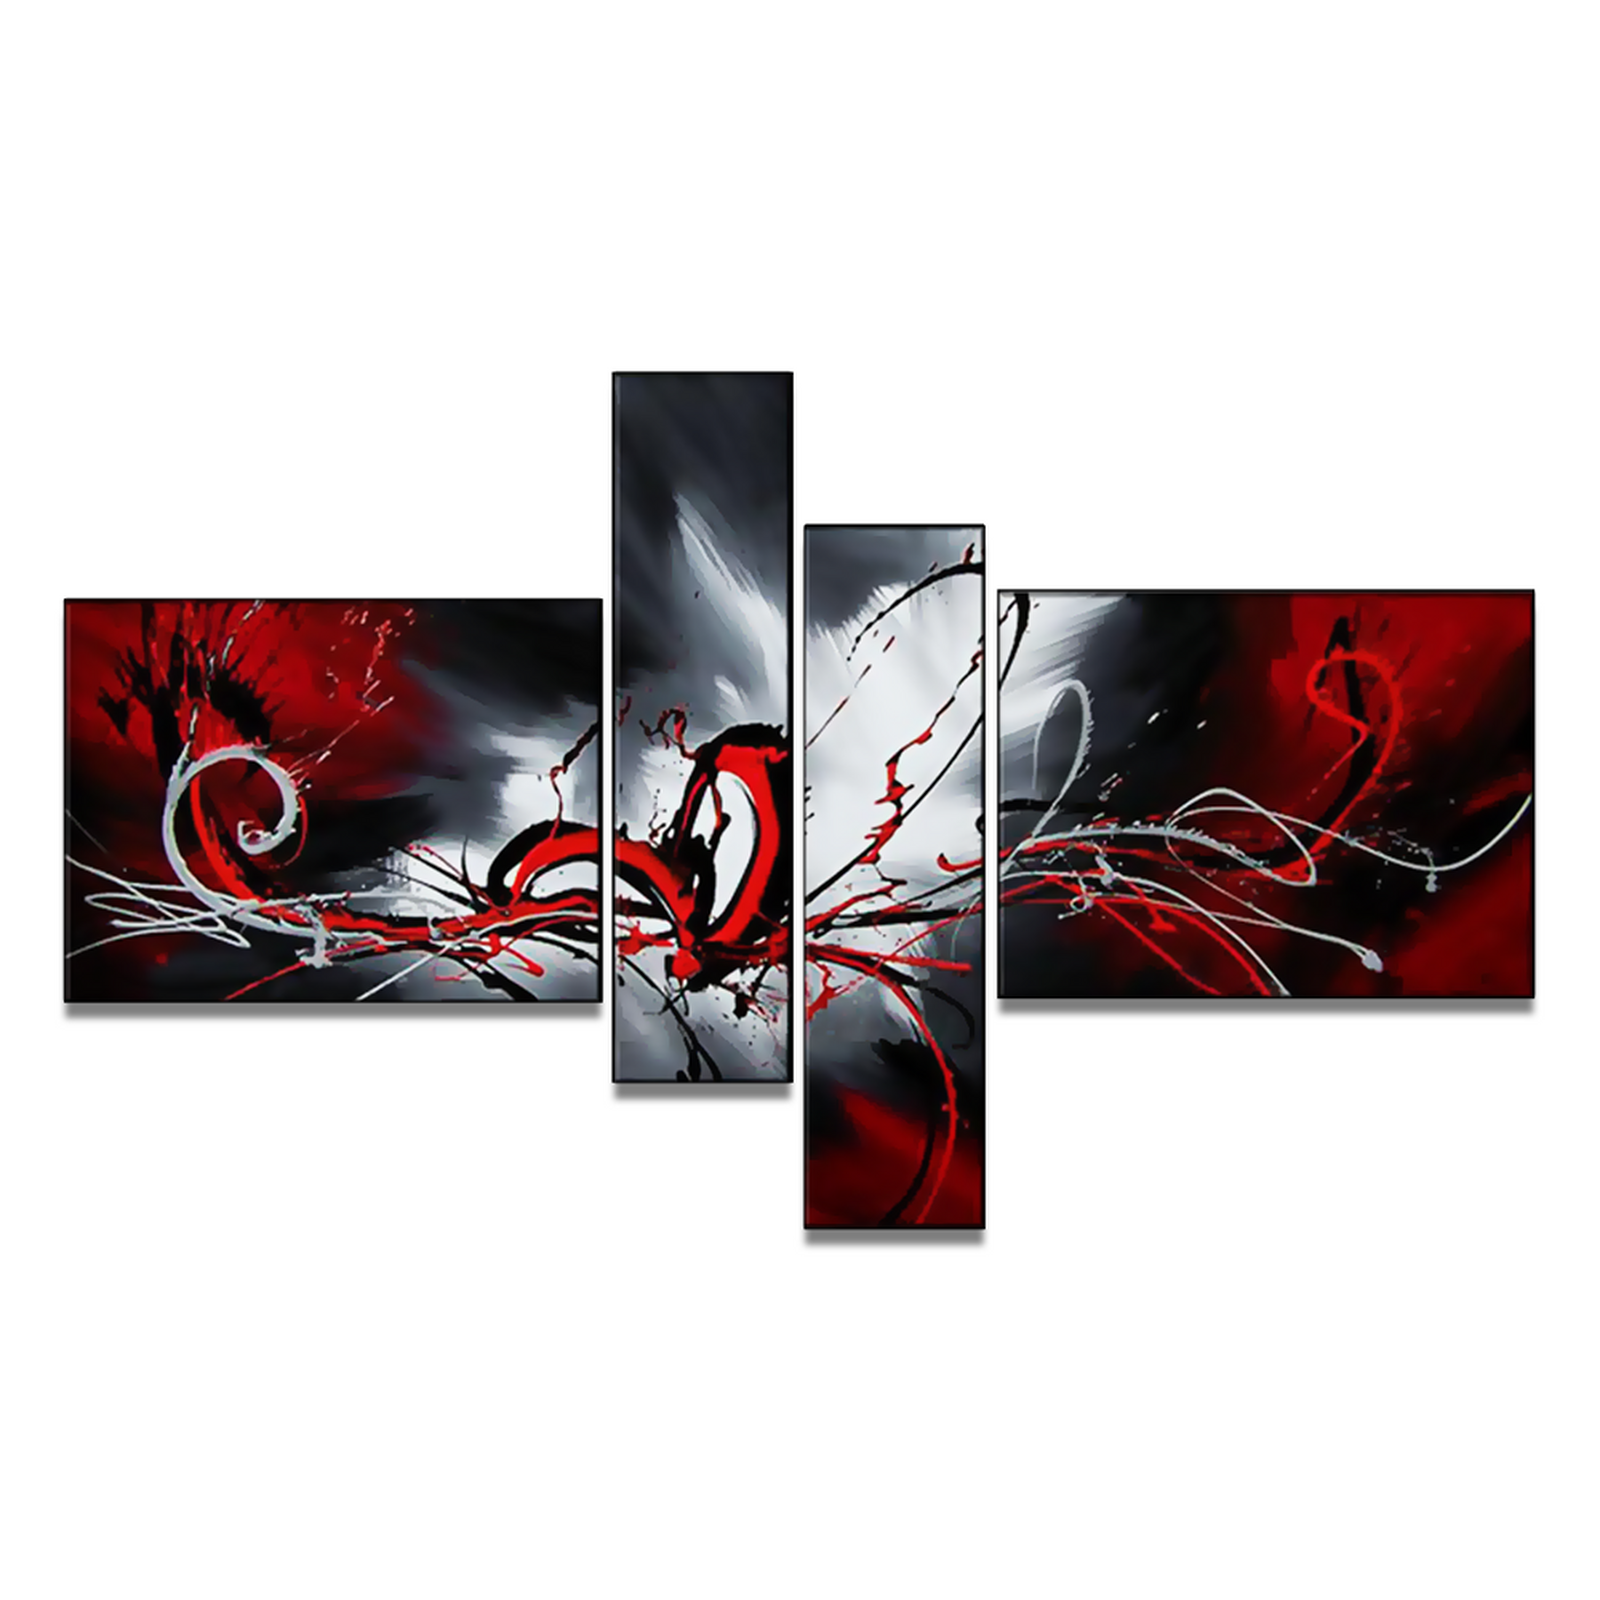 Red and Grey Abstract Canvas Painting - 63 x 33 in - 4 Panels